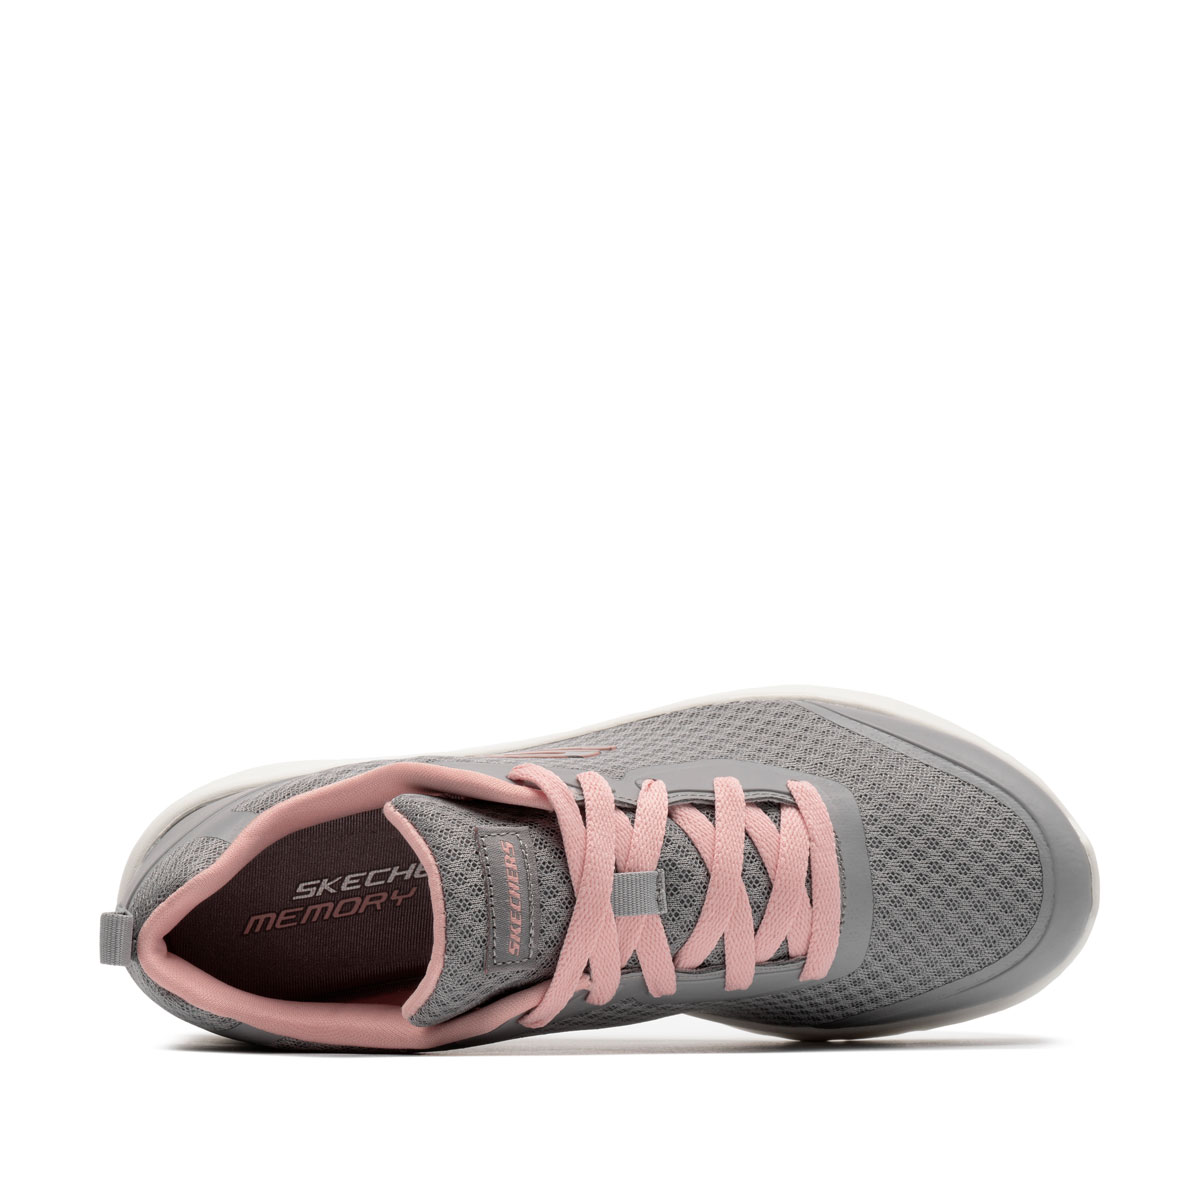 Skechers Dynamight 2.0  149541-GYCL